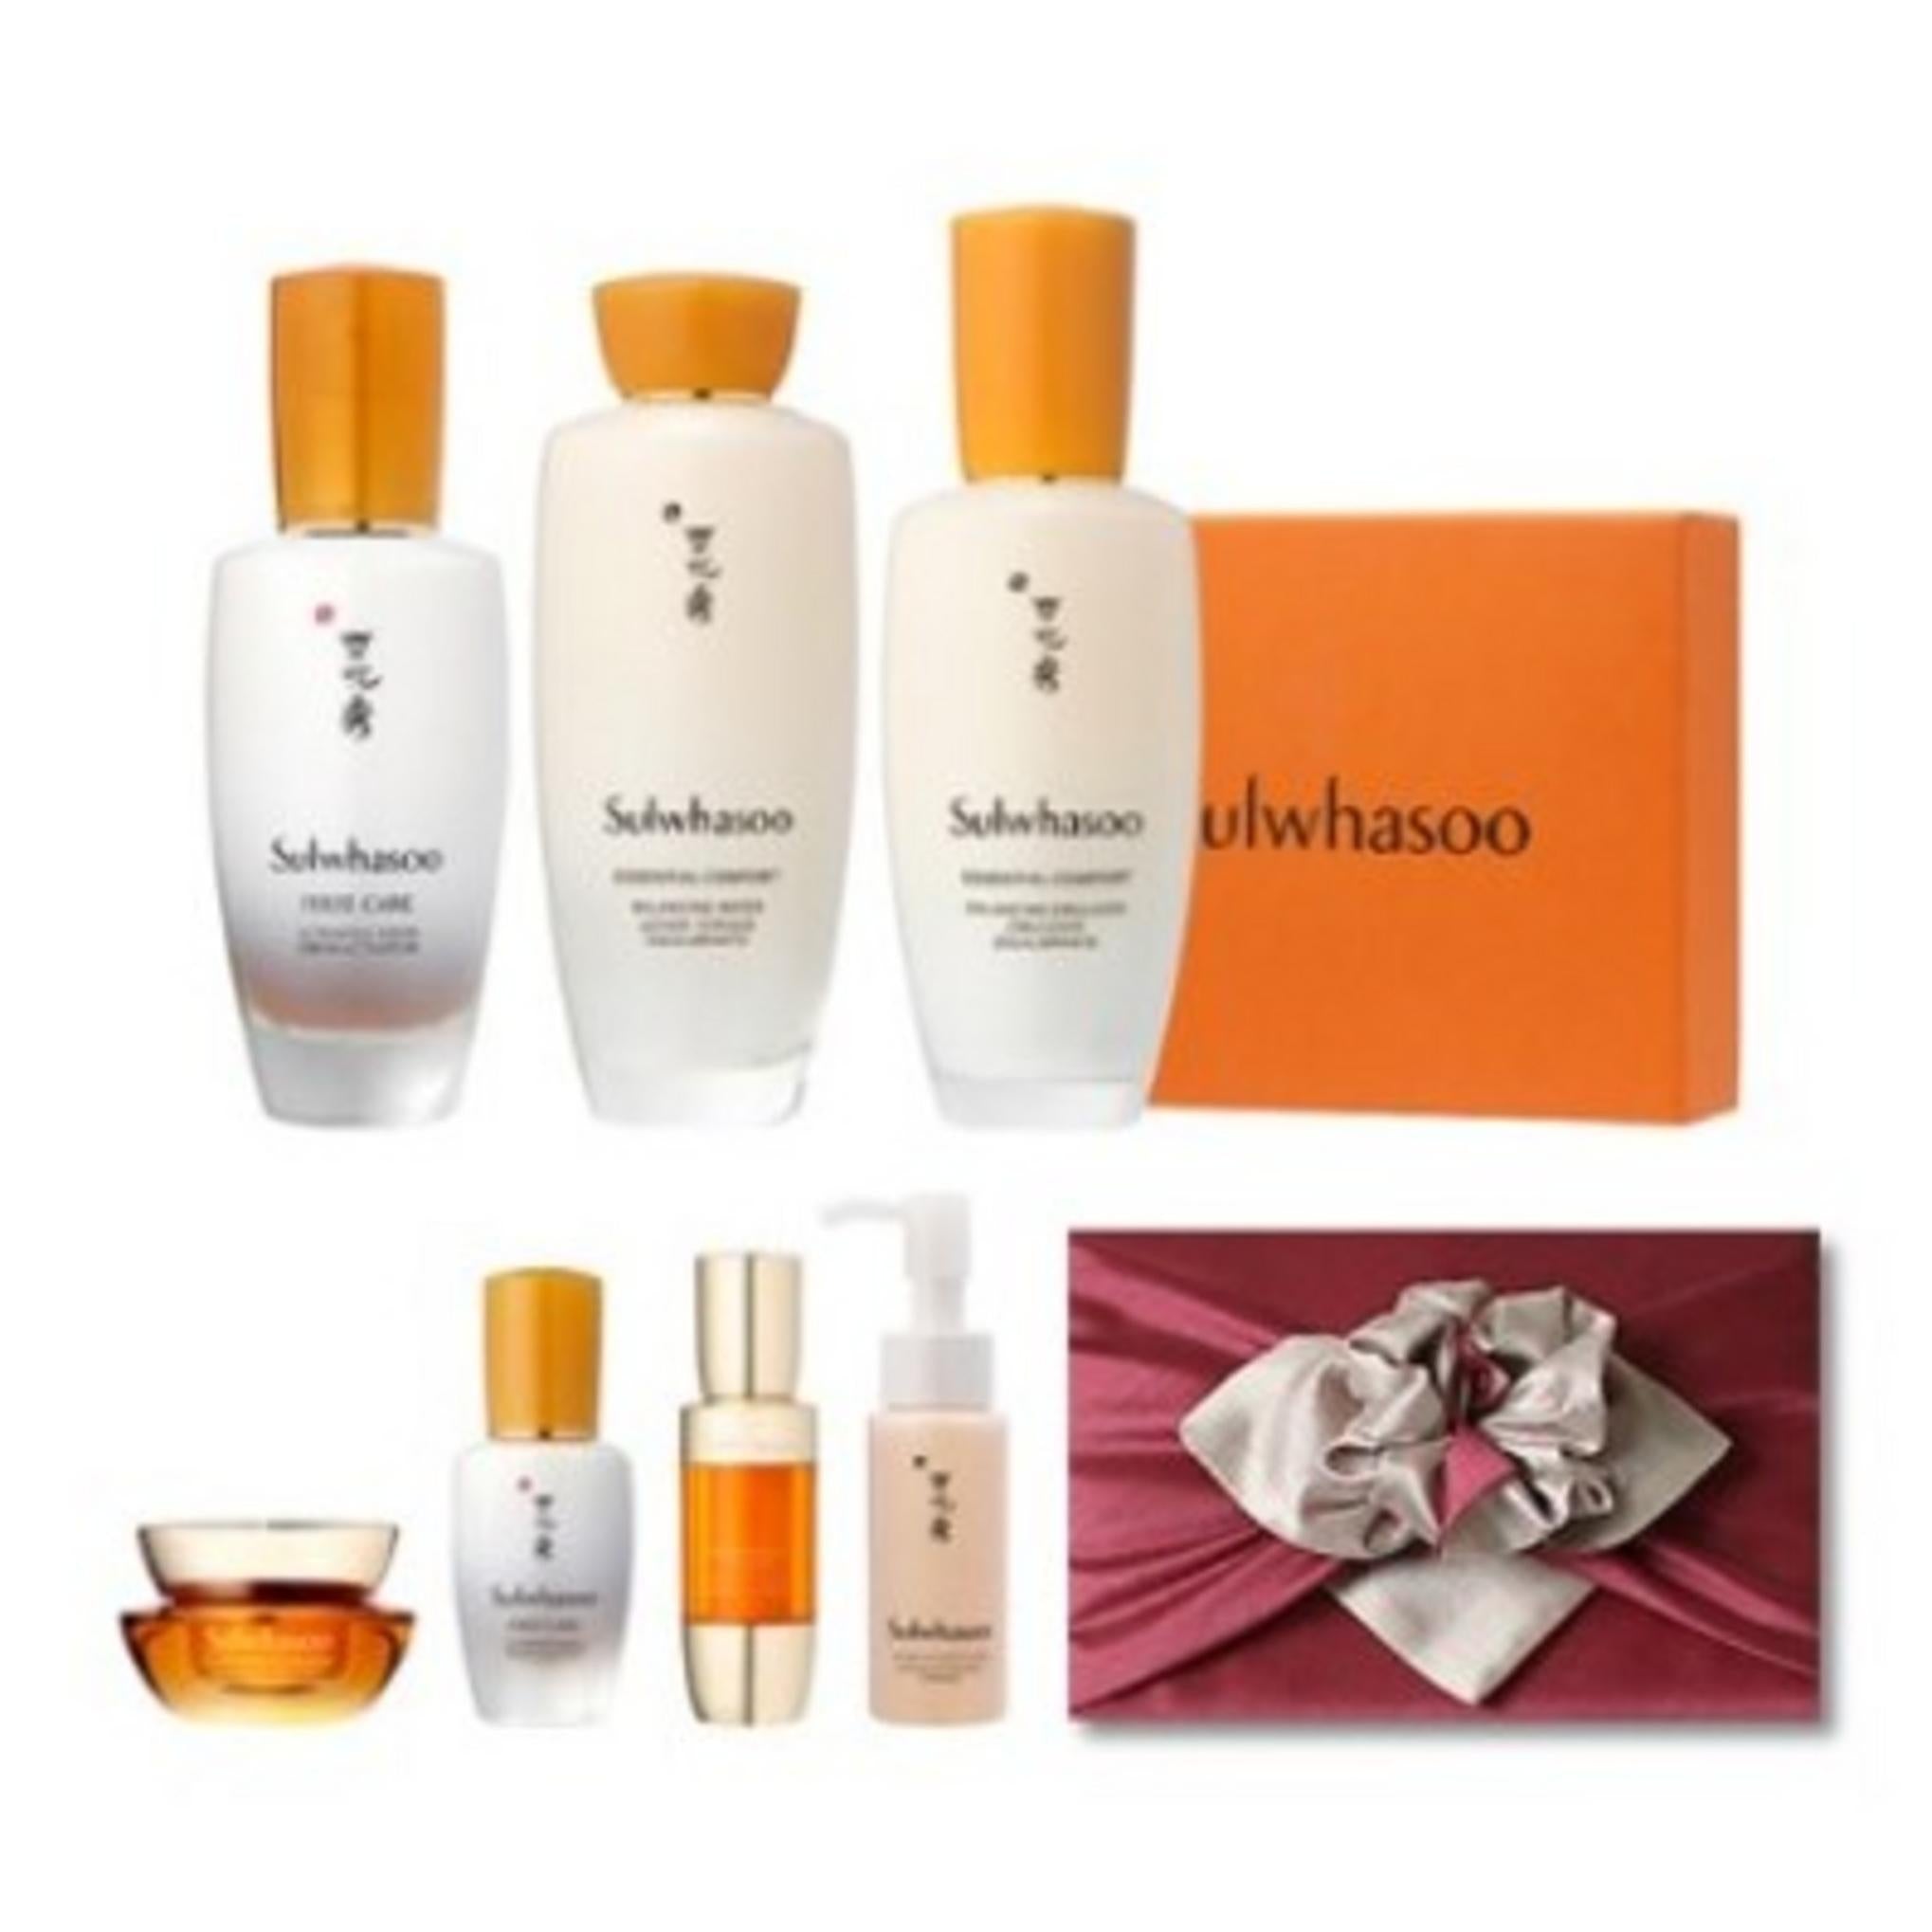 Sulwhasoo First Care Essential 3 types Special Set First Care Activating Serum 90ml + Consonant 2 types shopping bag